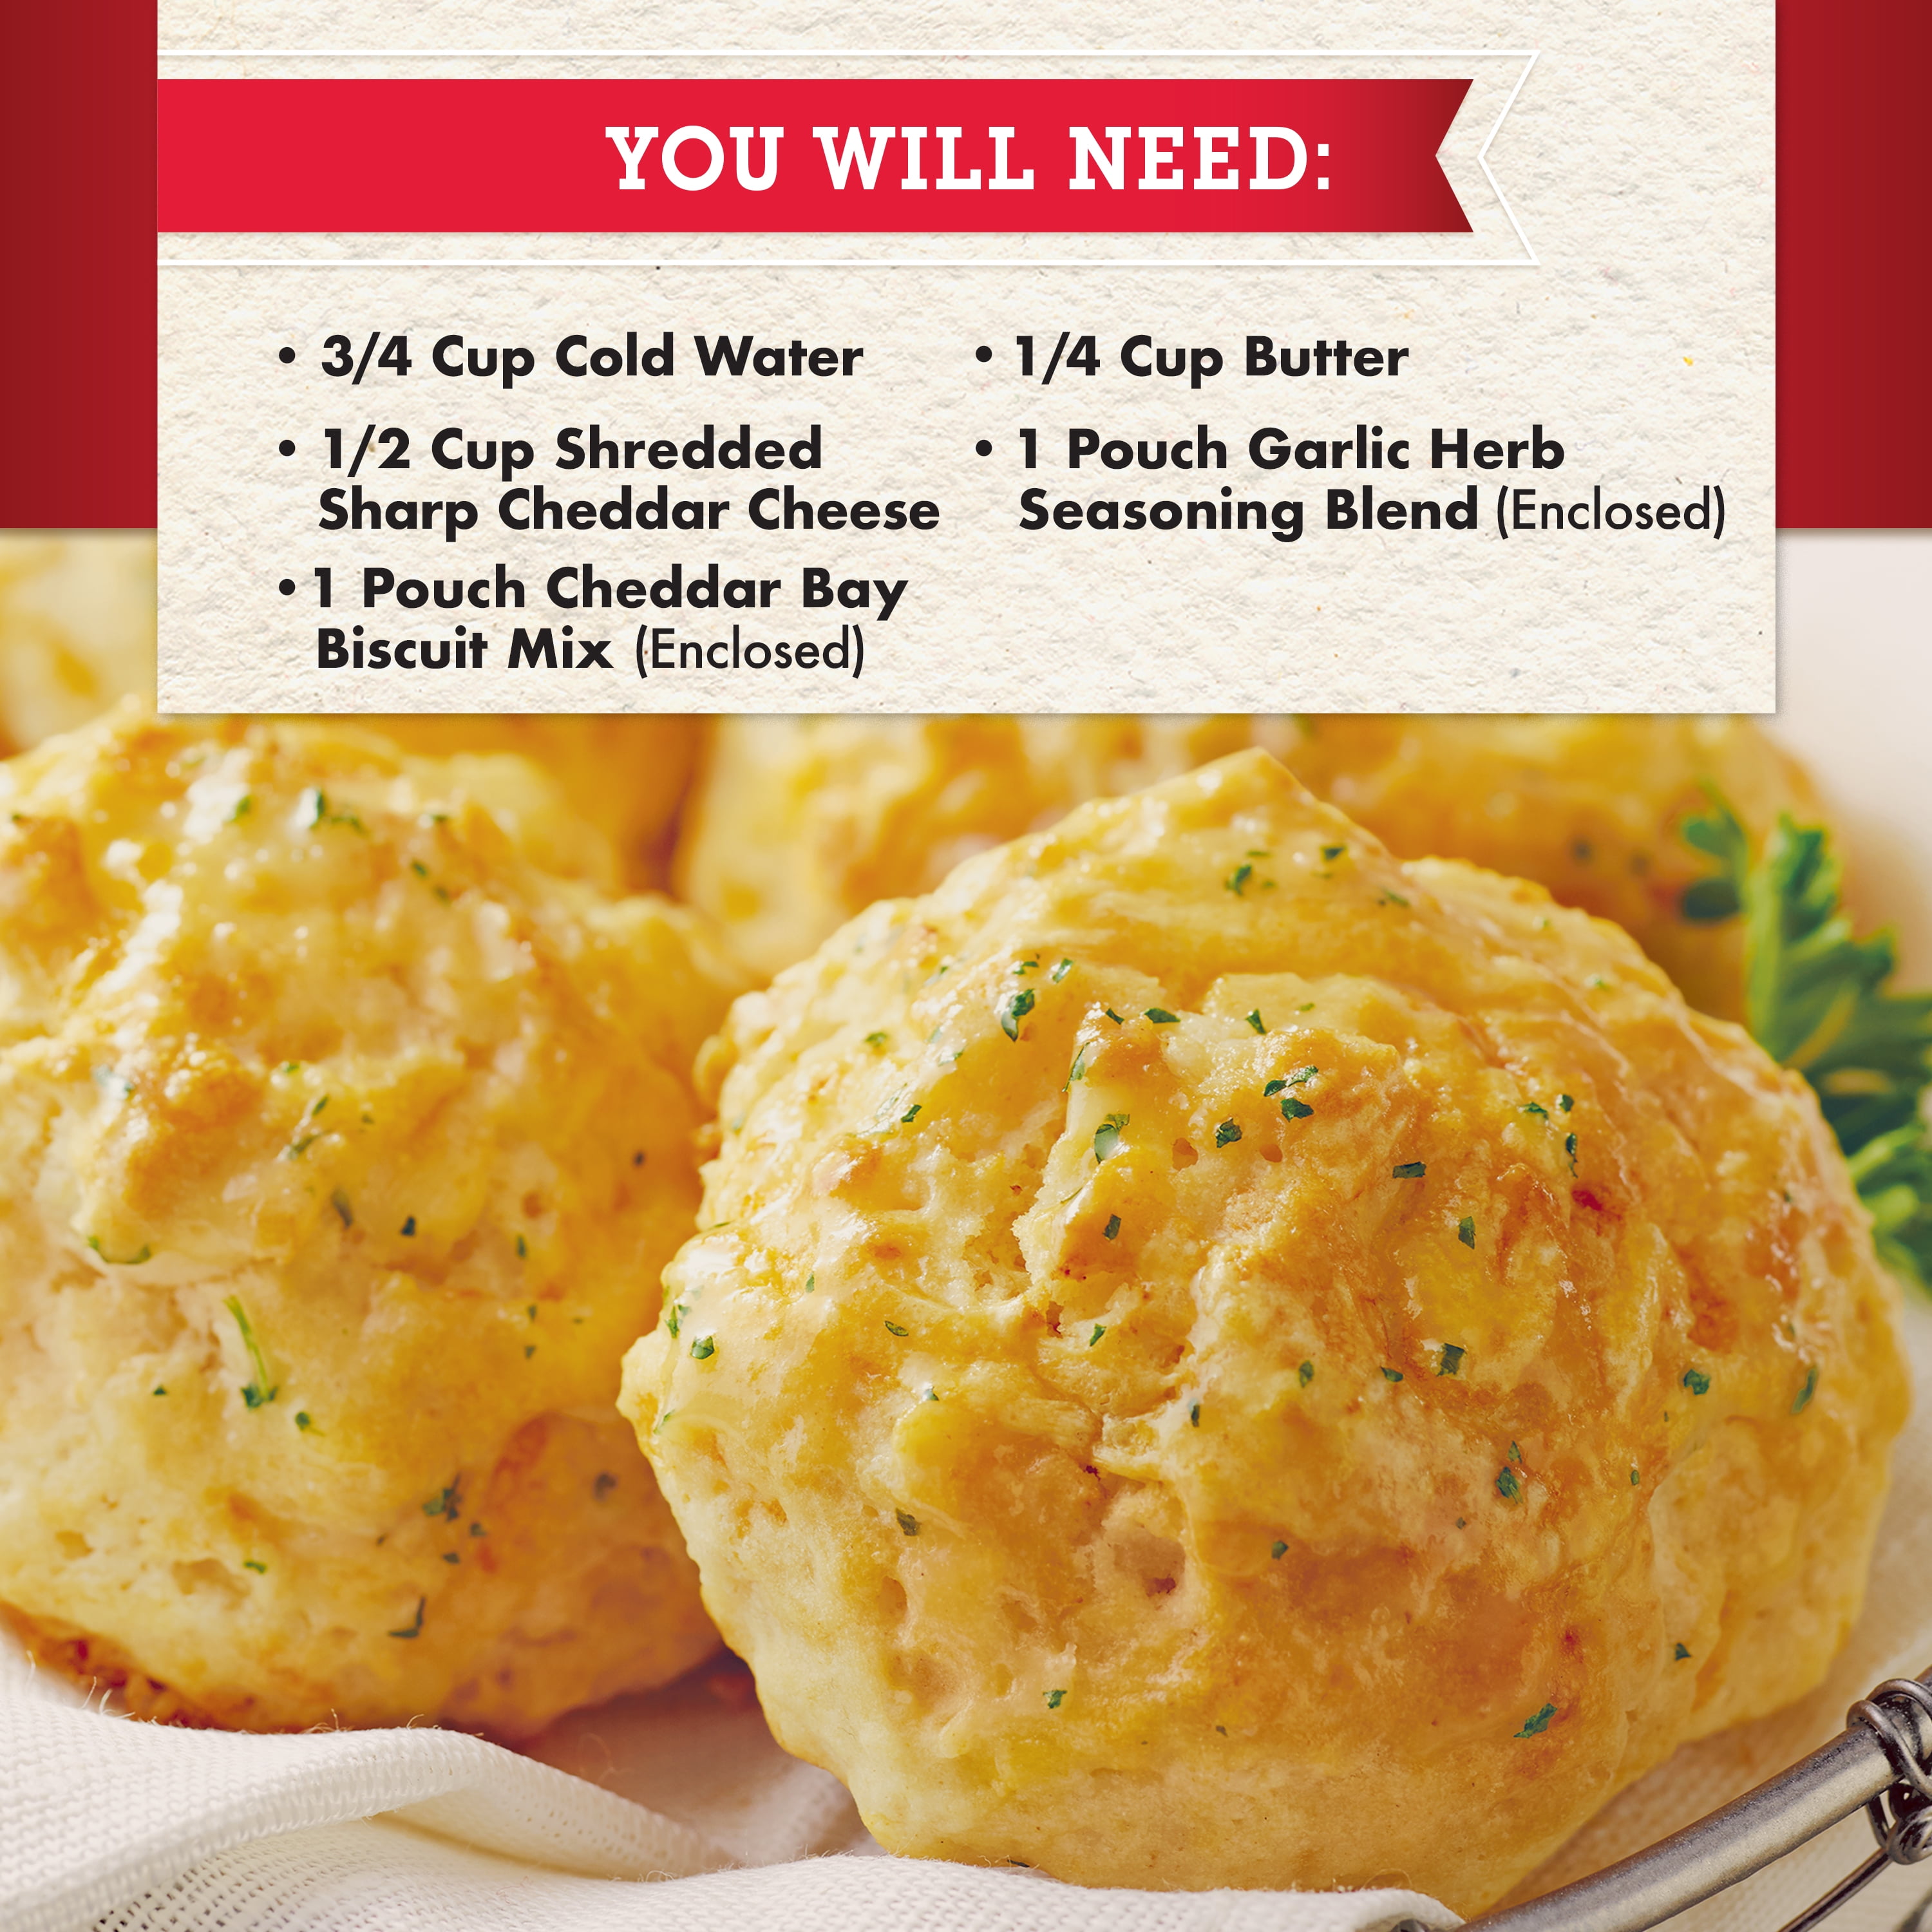 Red Lobster Cheddar Bay Biscuit Mix 4 pk./2 lbs. Makes 40 biscuits